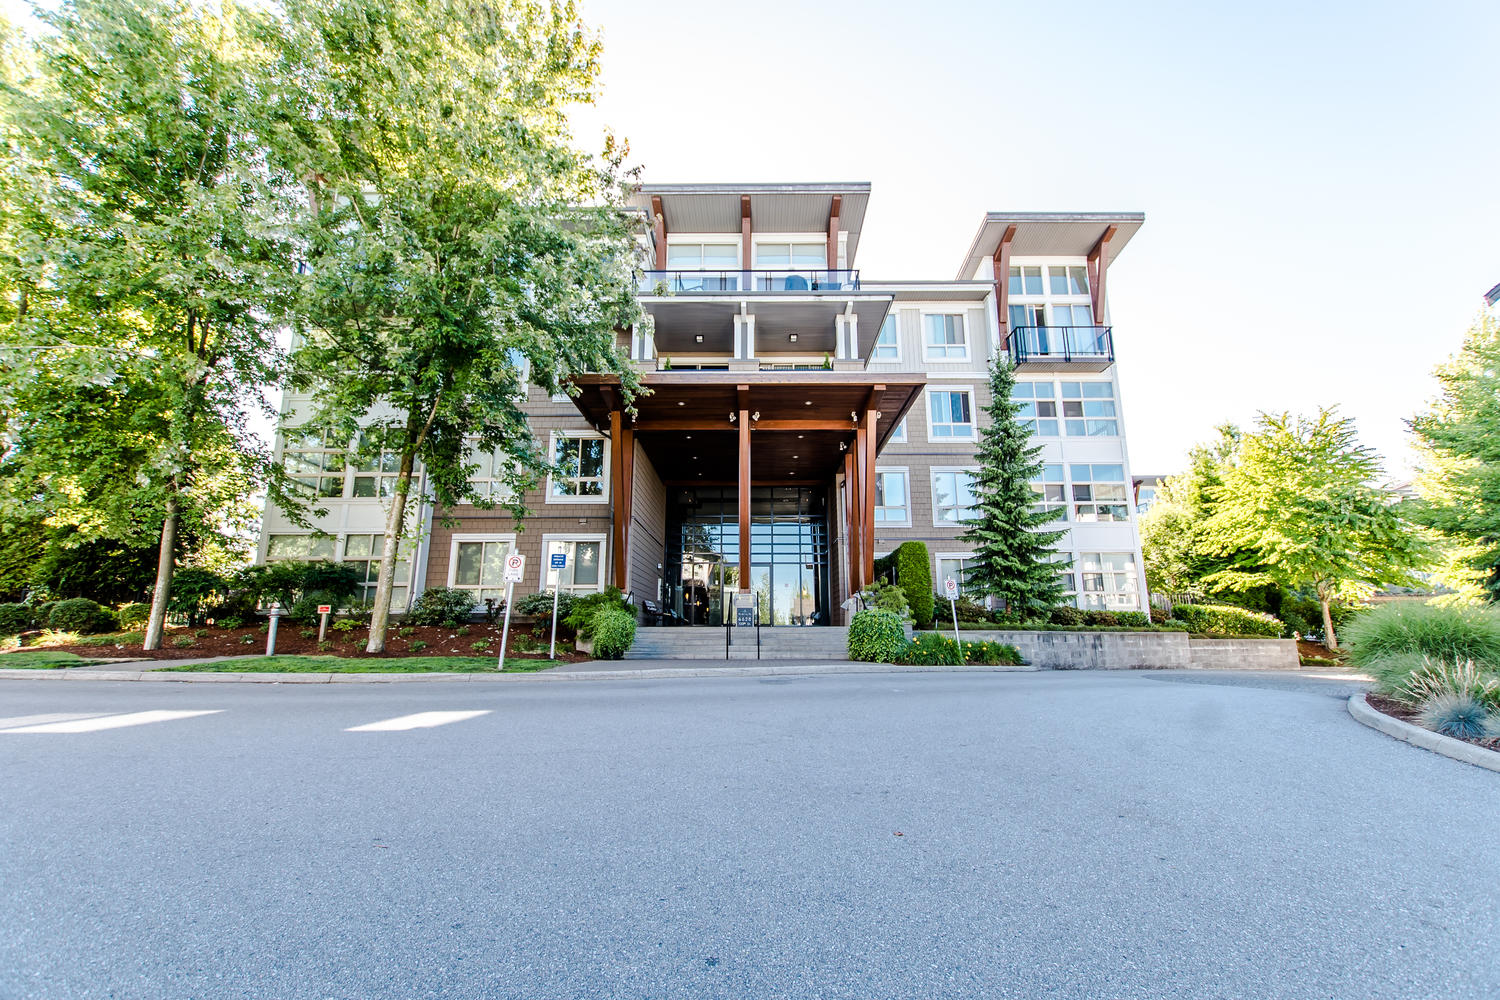 415 - 6628 120th Street, Surrey, British Columbia, Canada, 2 Bedrooms Bedrooms, Register to View ,2 BathroomsBathrooms,For Sale,120th,1547